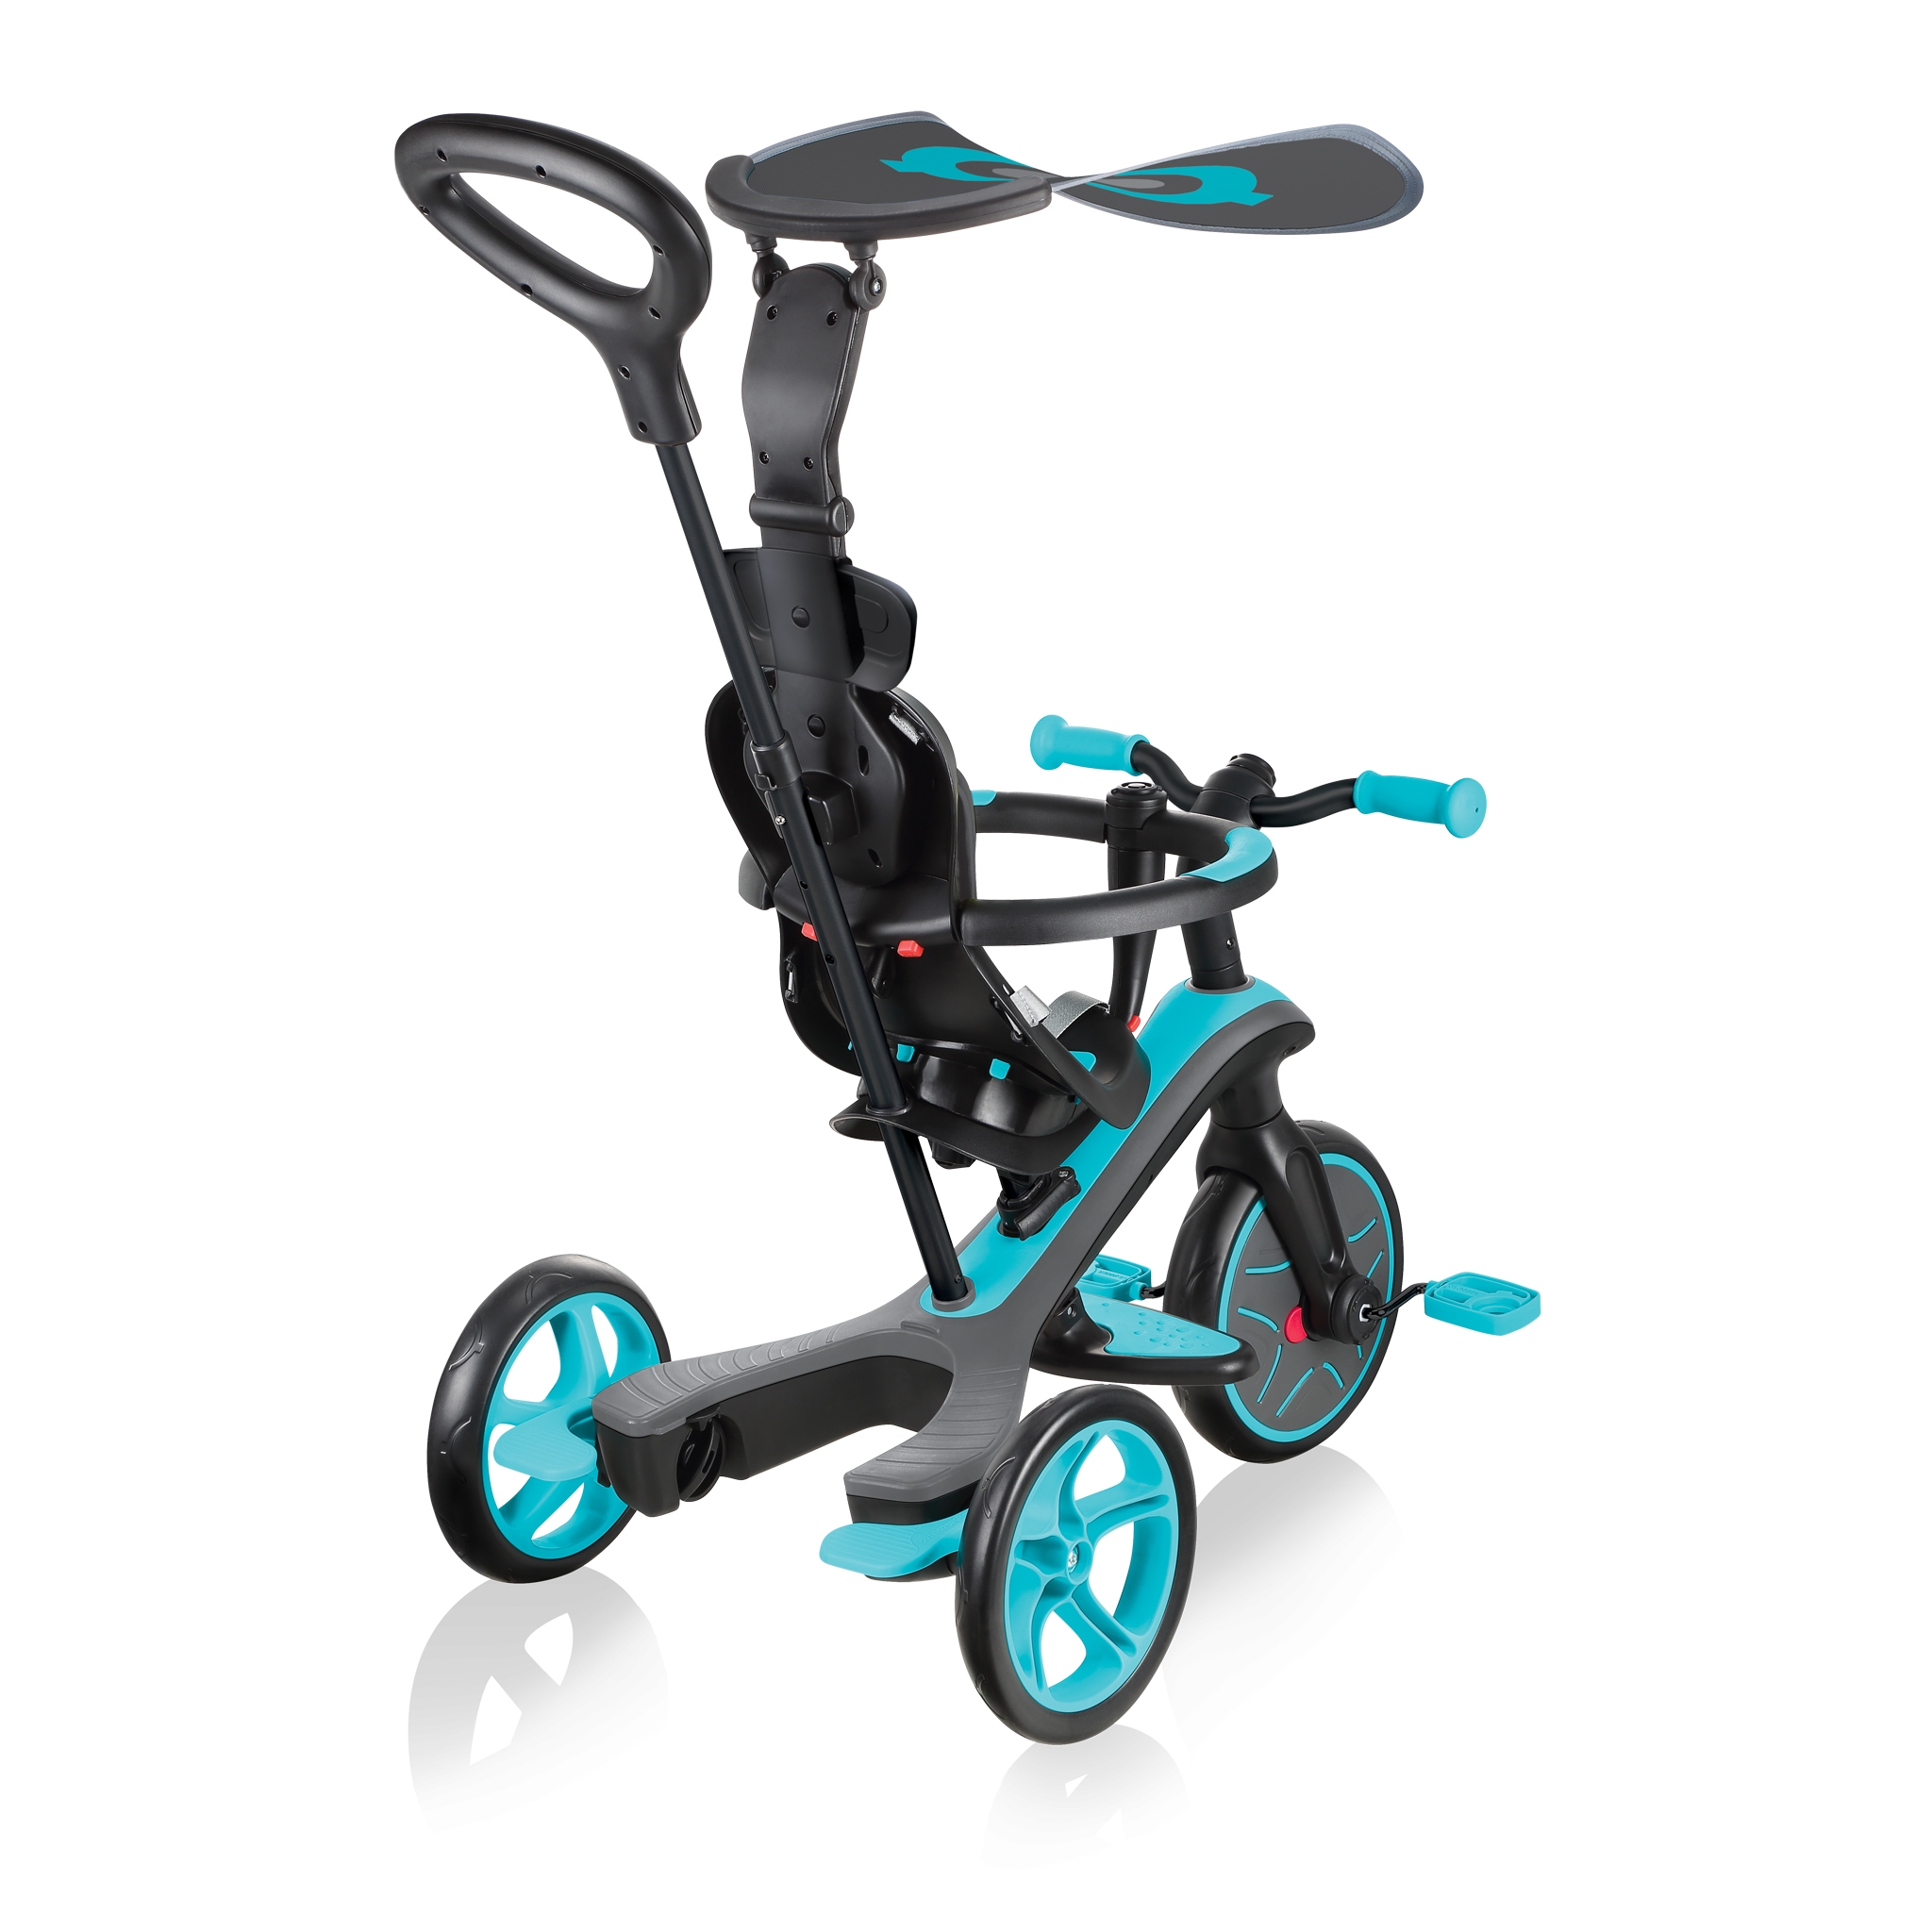 Globber-EXPLORER-TRIKE-4in1-all-in-one-baby-tricycle-and-kids-balance-bike-stage1-infant-trike 5